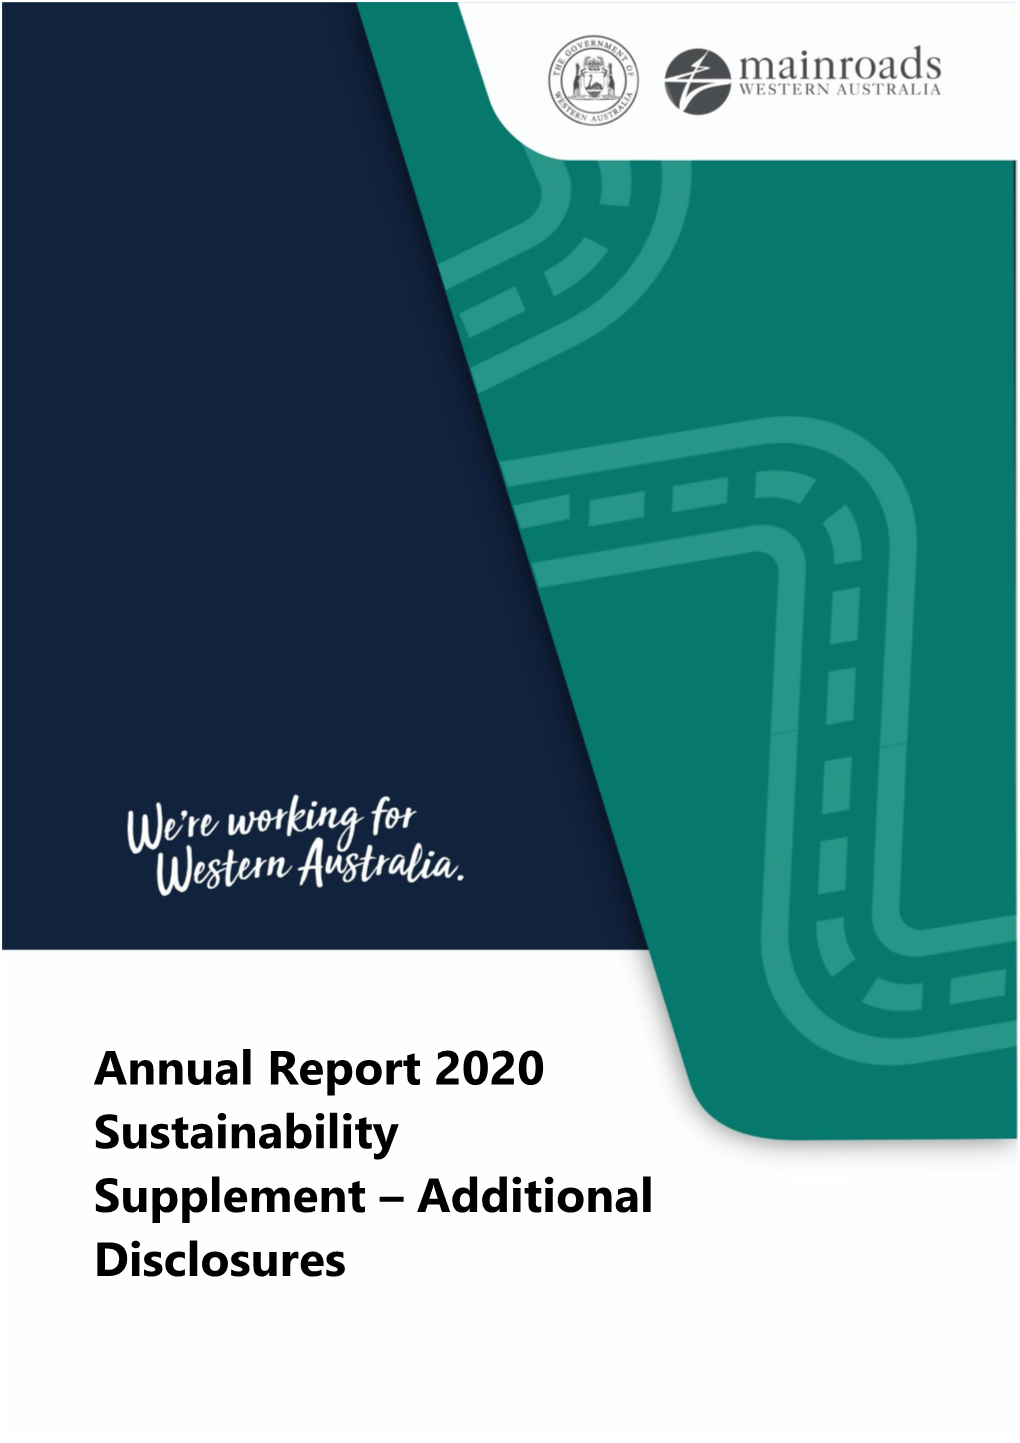 Annual Report 2020 Sustainability Supplement – Additional Disclosures